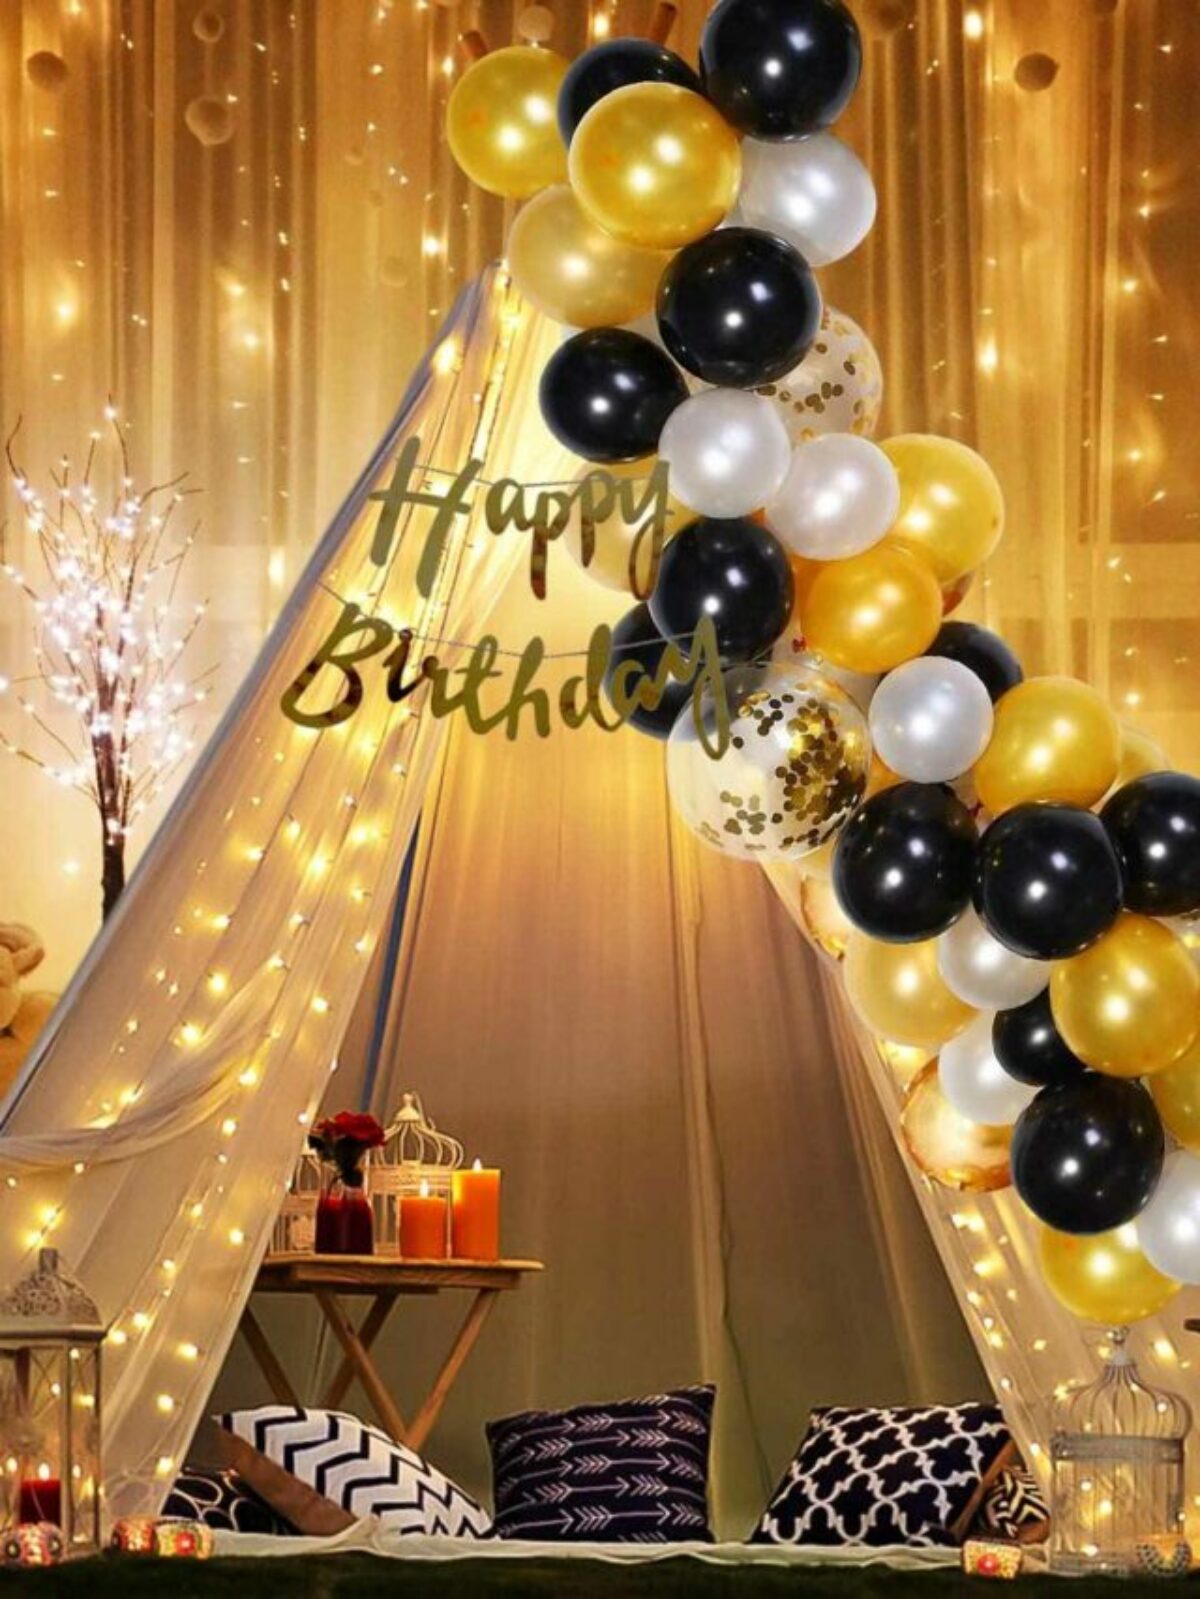 Birthday Party Decoration Room With Table Setup And Balloon. Stock Photo,  Picture and Royalty Free Image. Image 139313108.